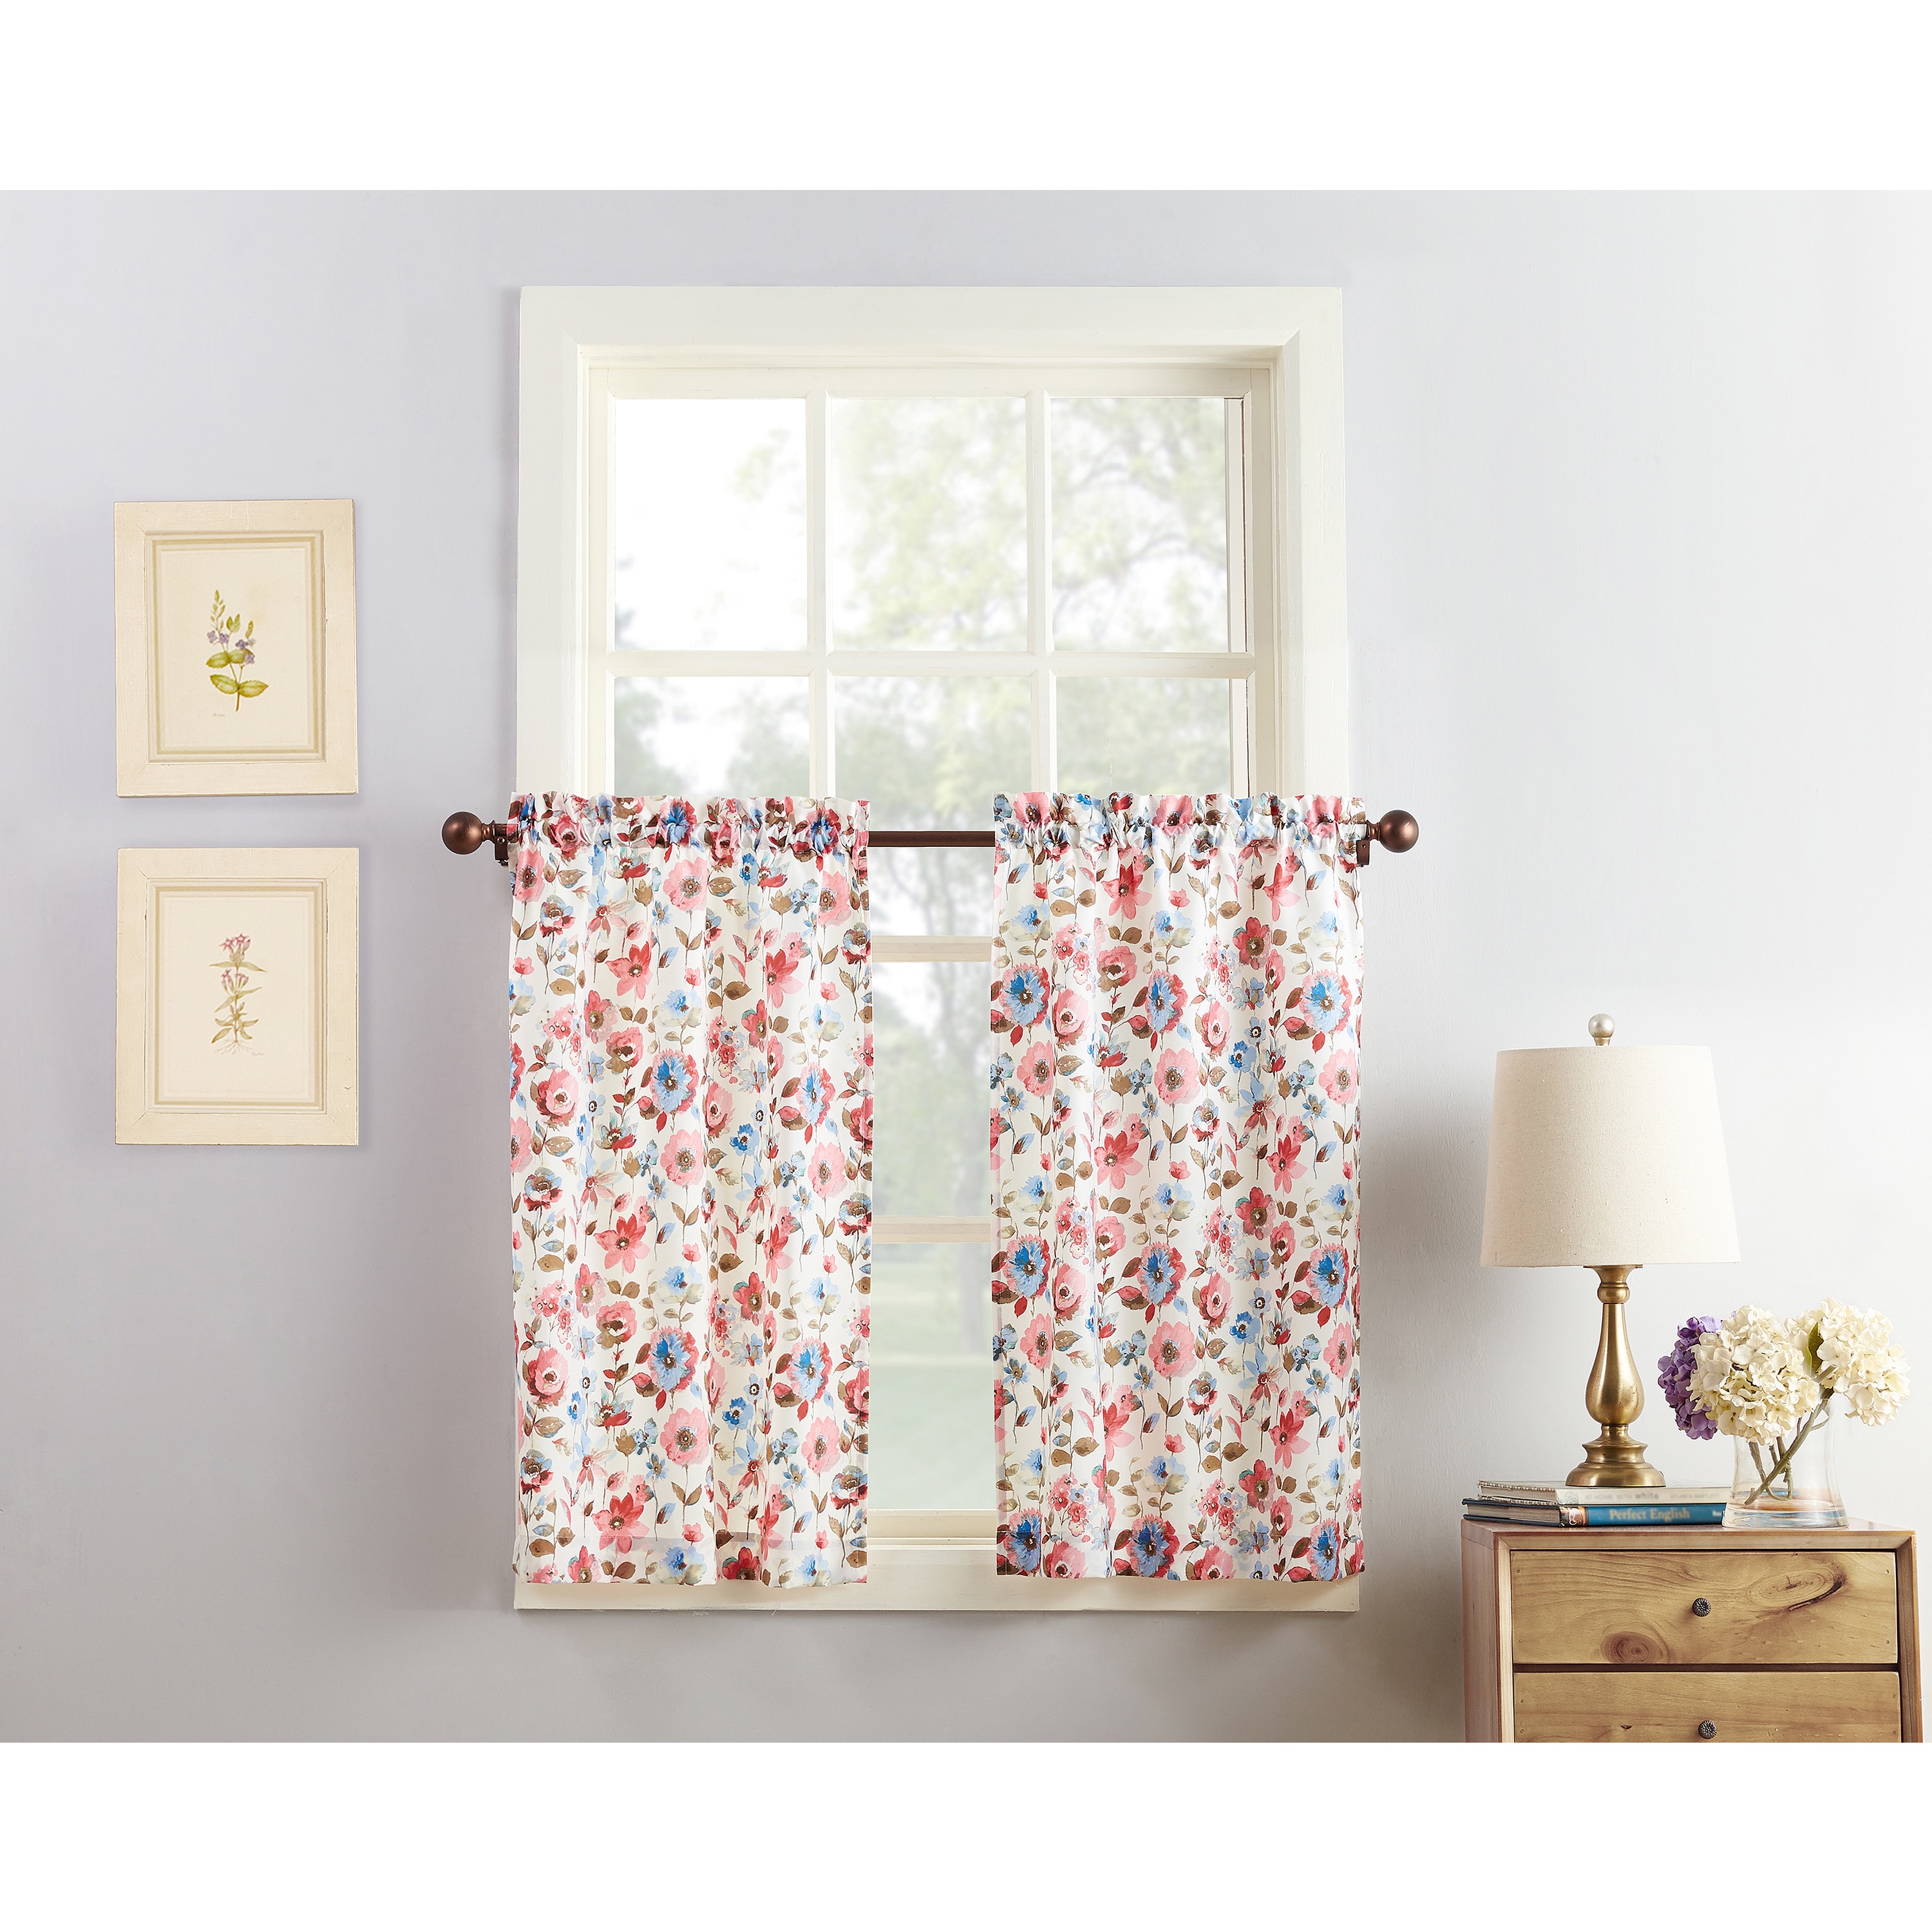 No. 918 Signy Jacobean Pattern 54 in. W x 36 in. L Light Filtering Rod Pocket Kitchen Curtain Tier Pair in White